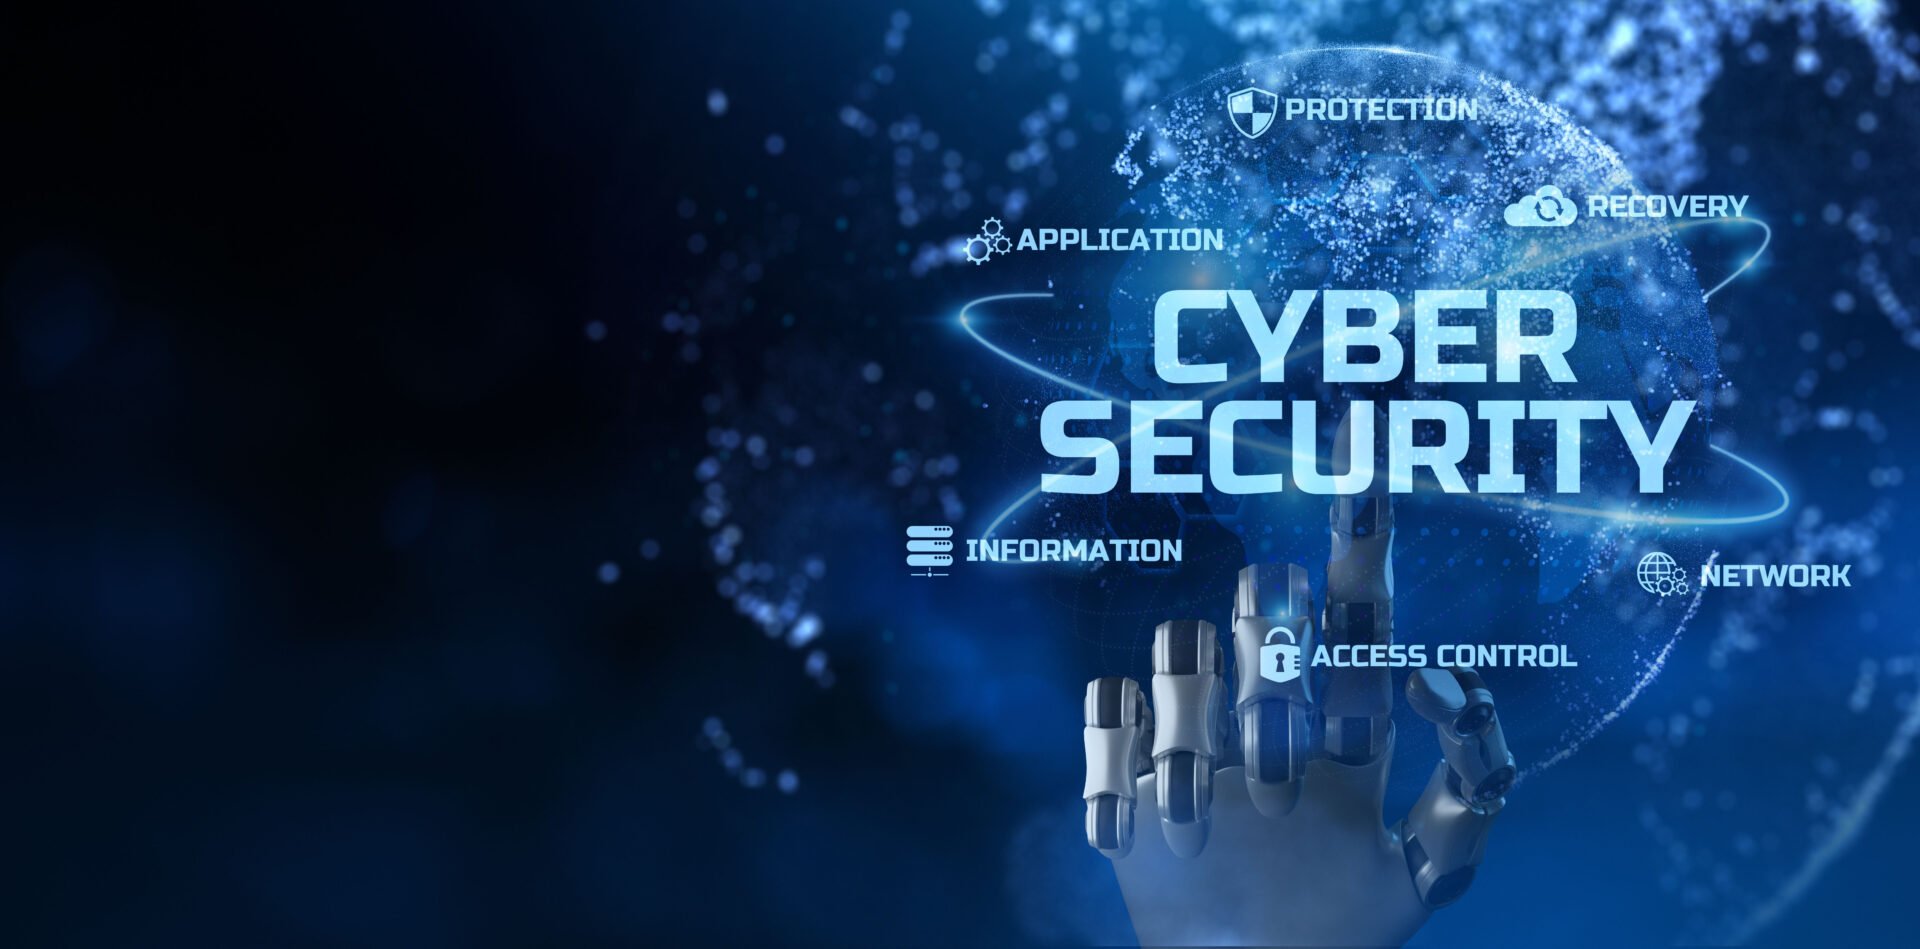 What is Cyber Security? Why is it Important Today?